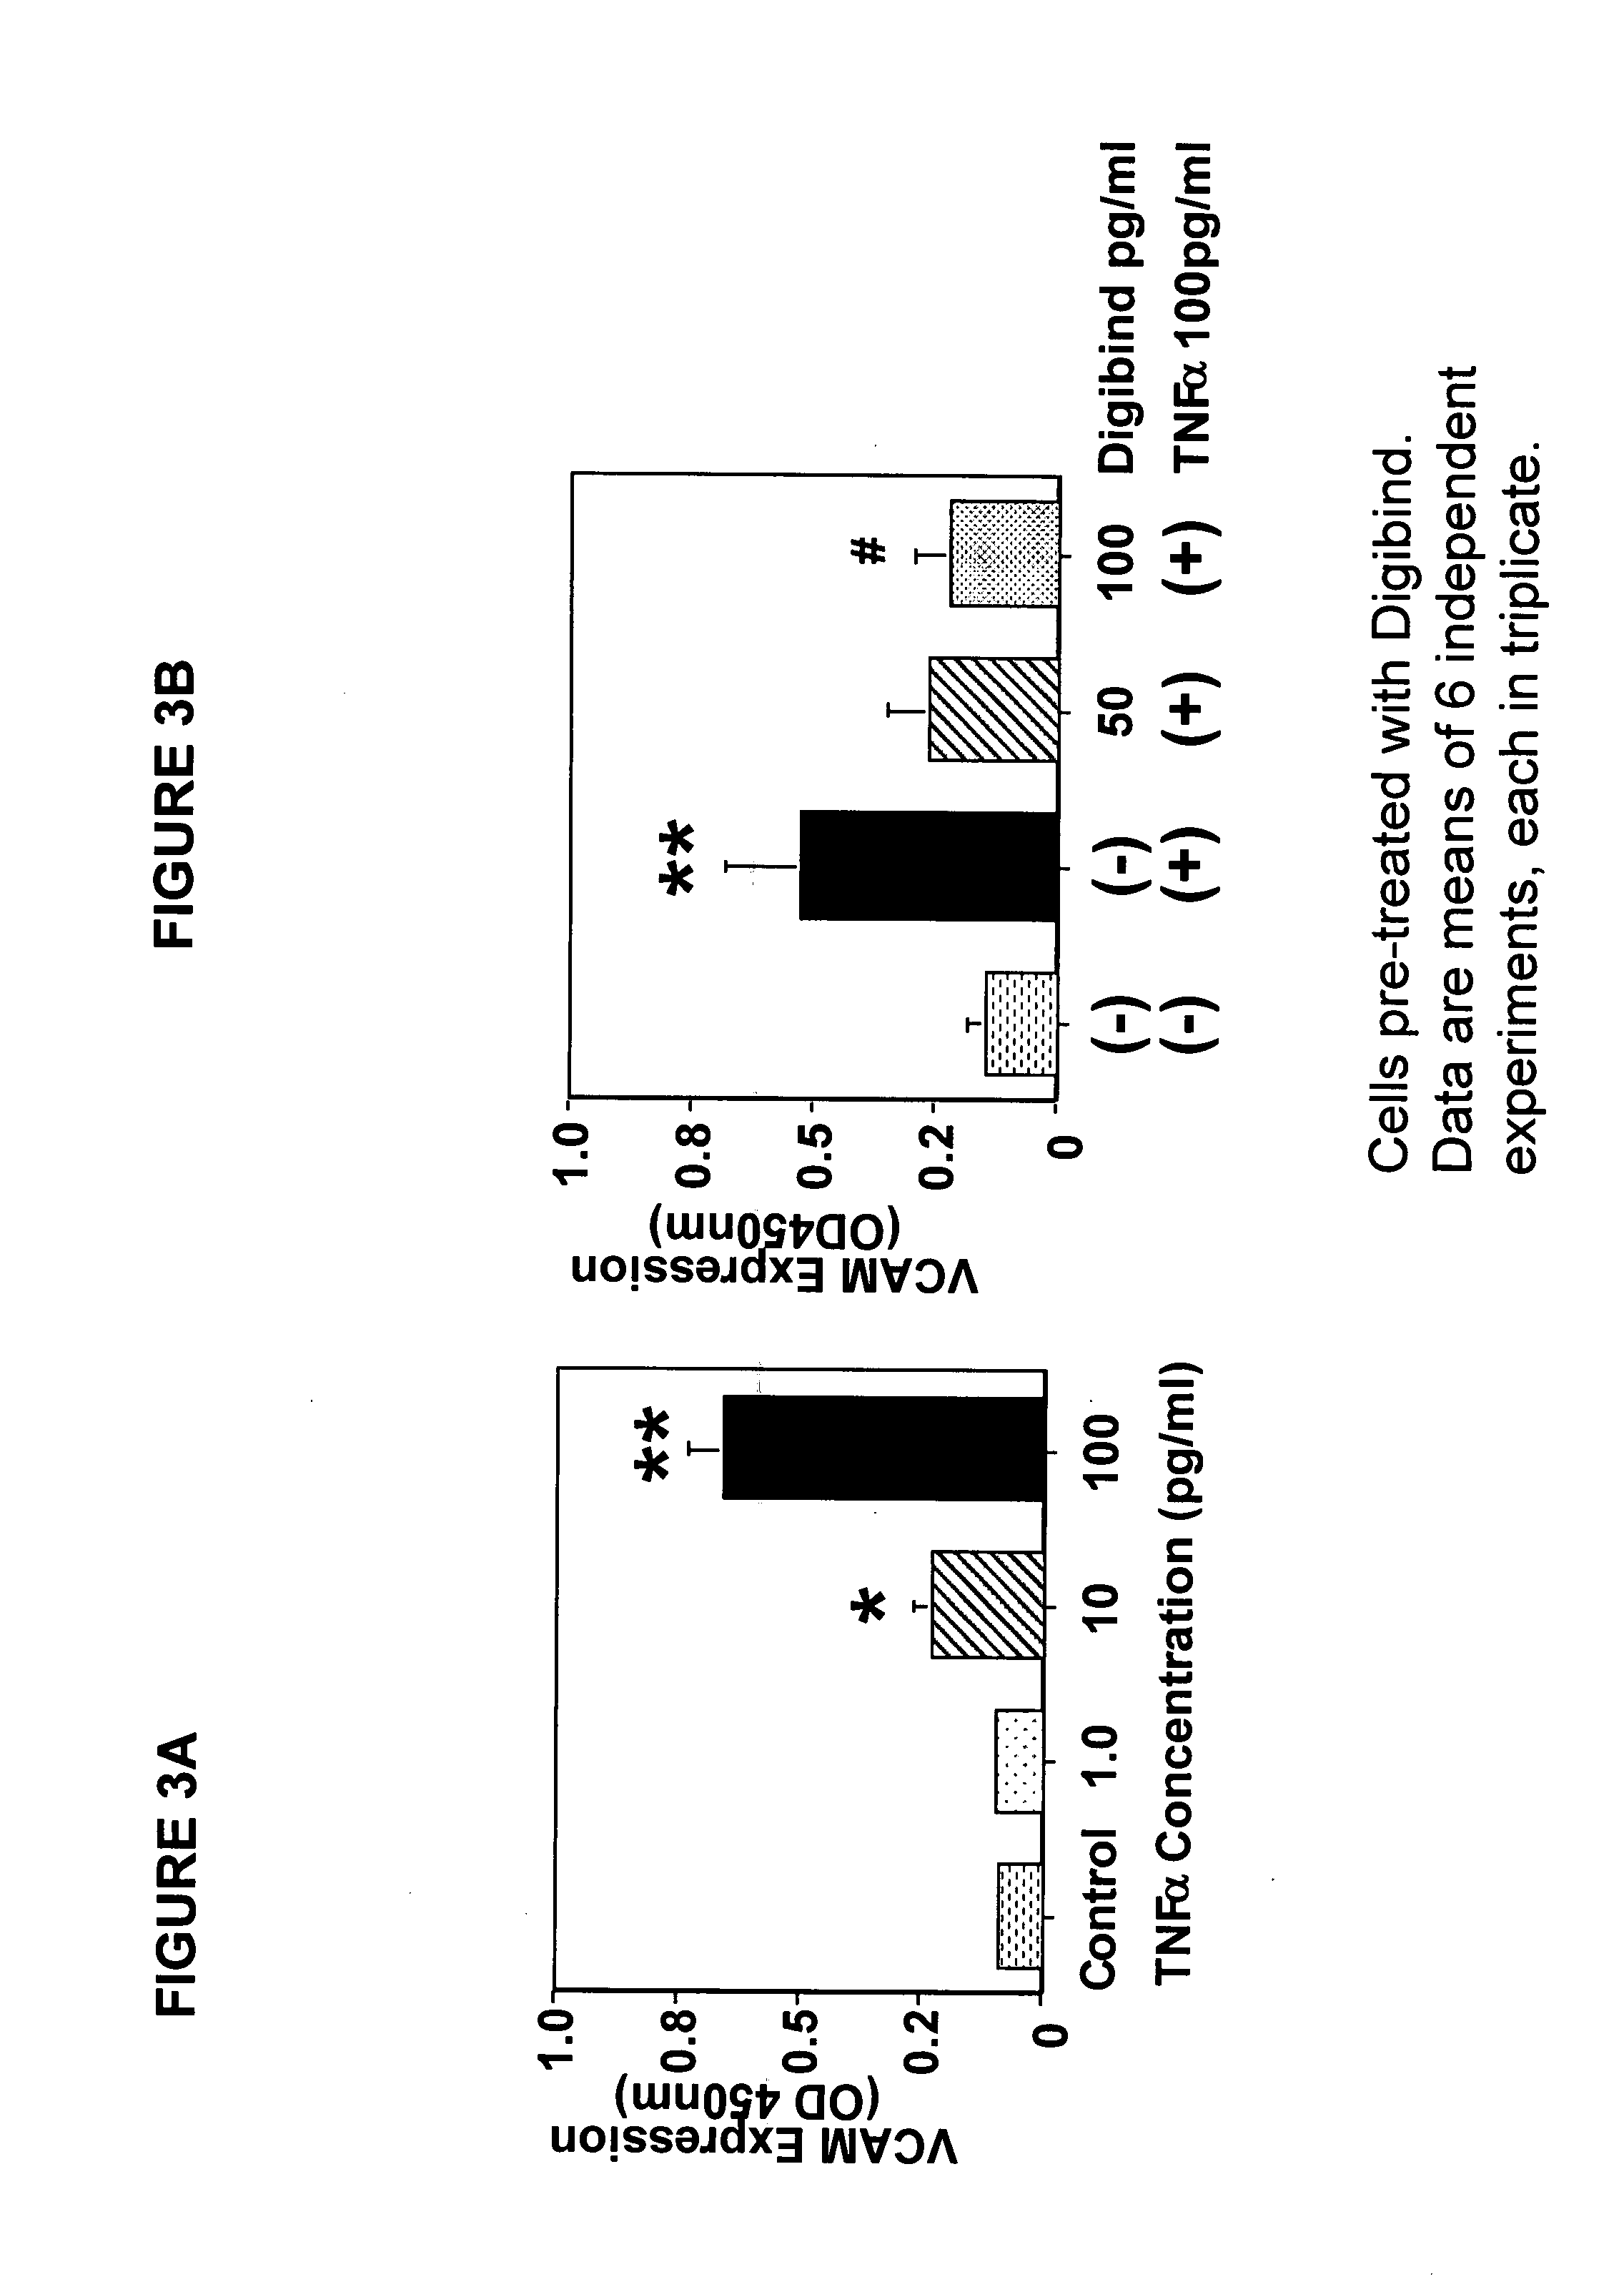 Composition for modulating the expression of cell adhesion molecules